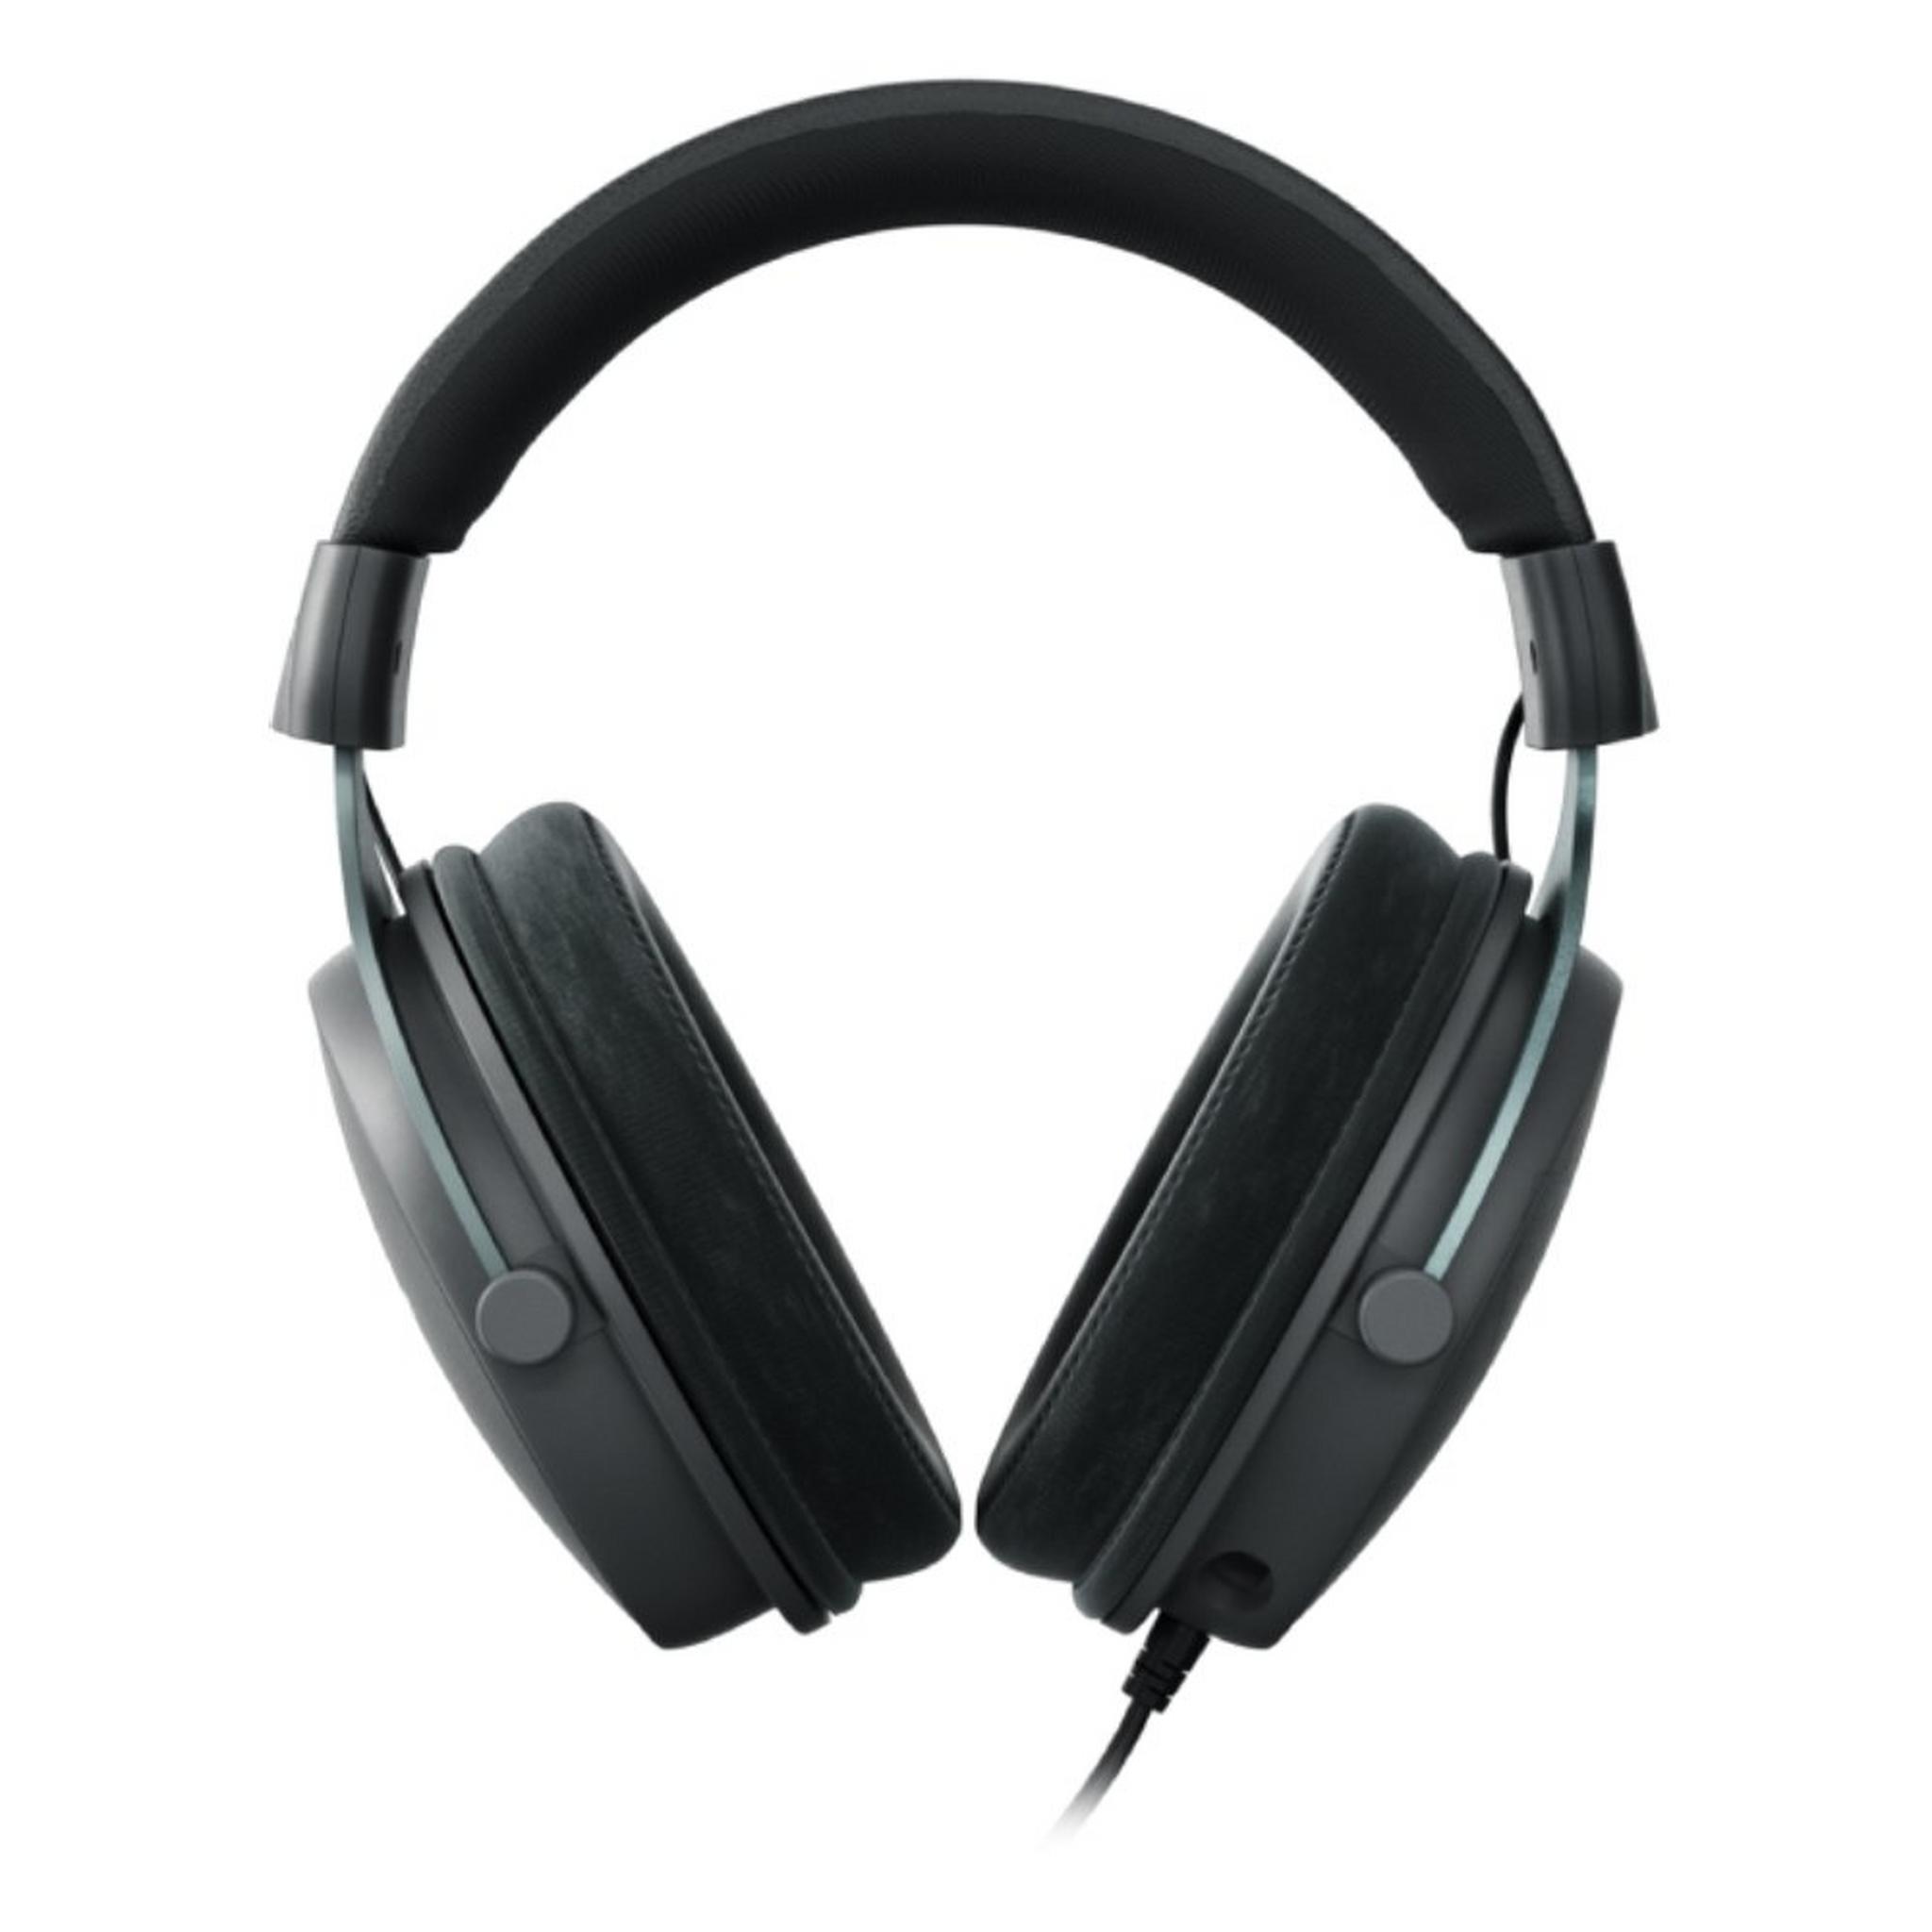 Fnatic React Plus Wired Gaming Headset